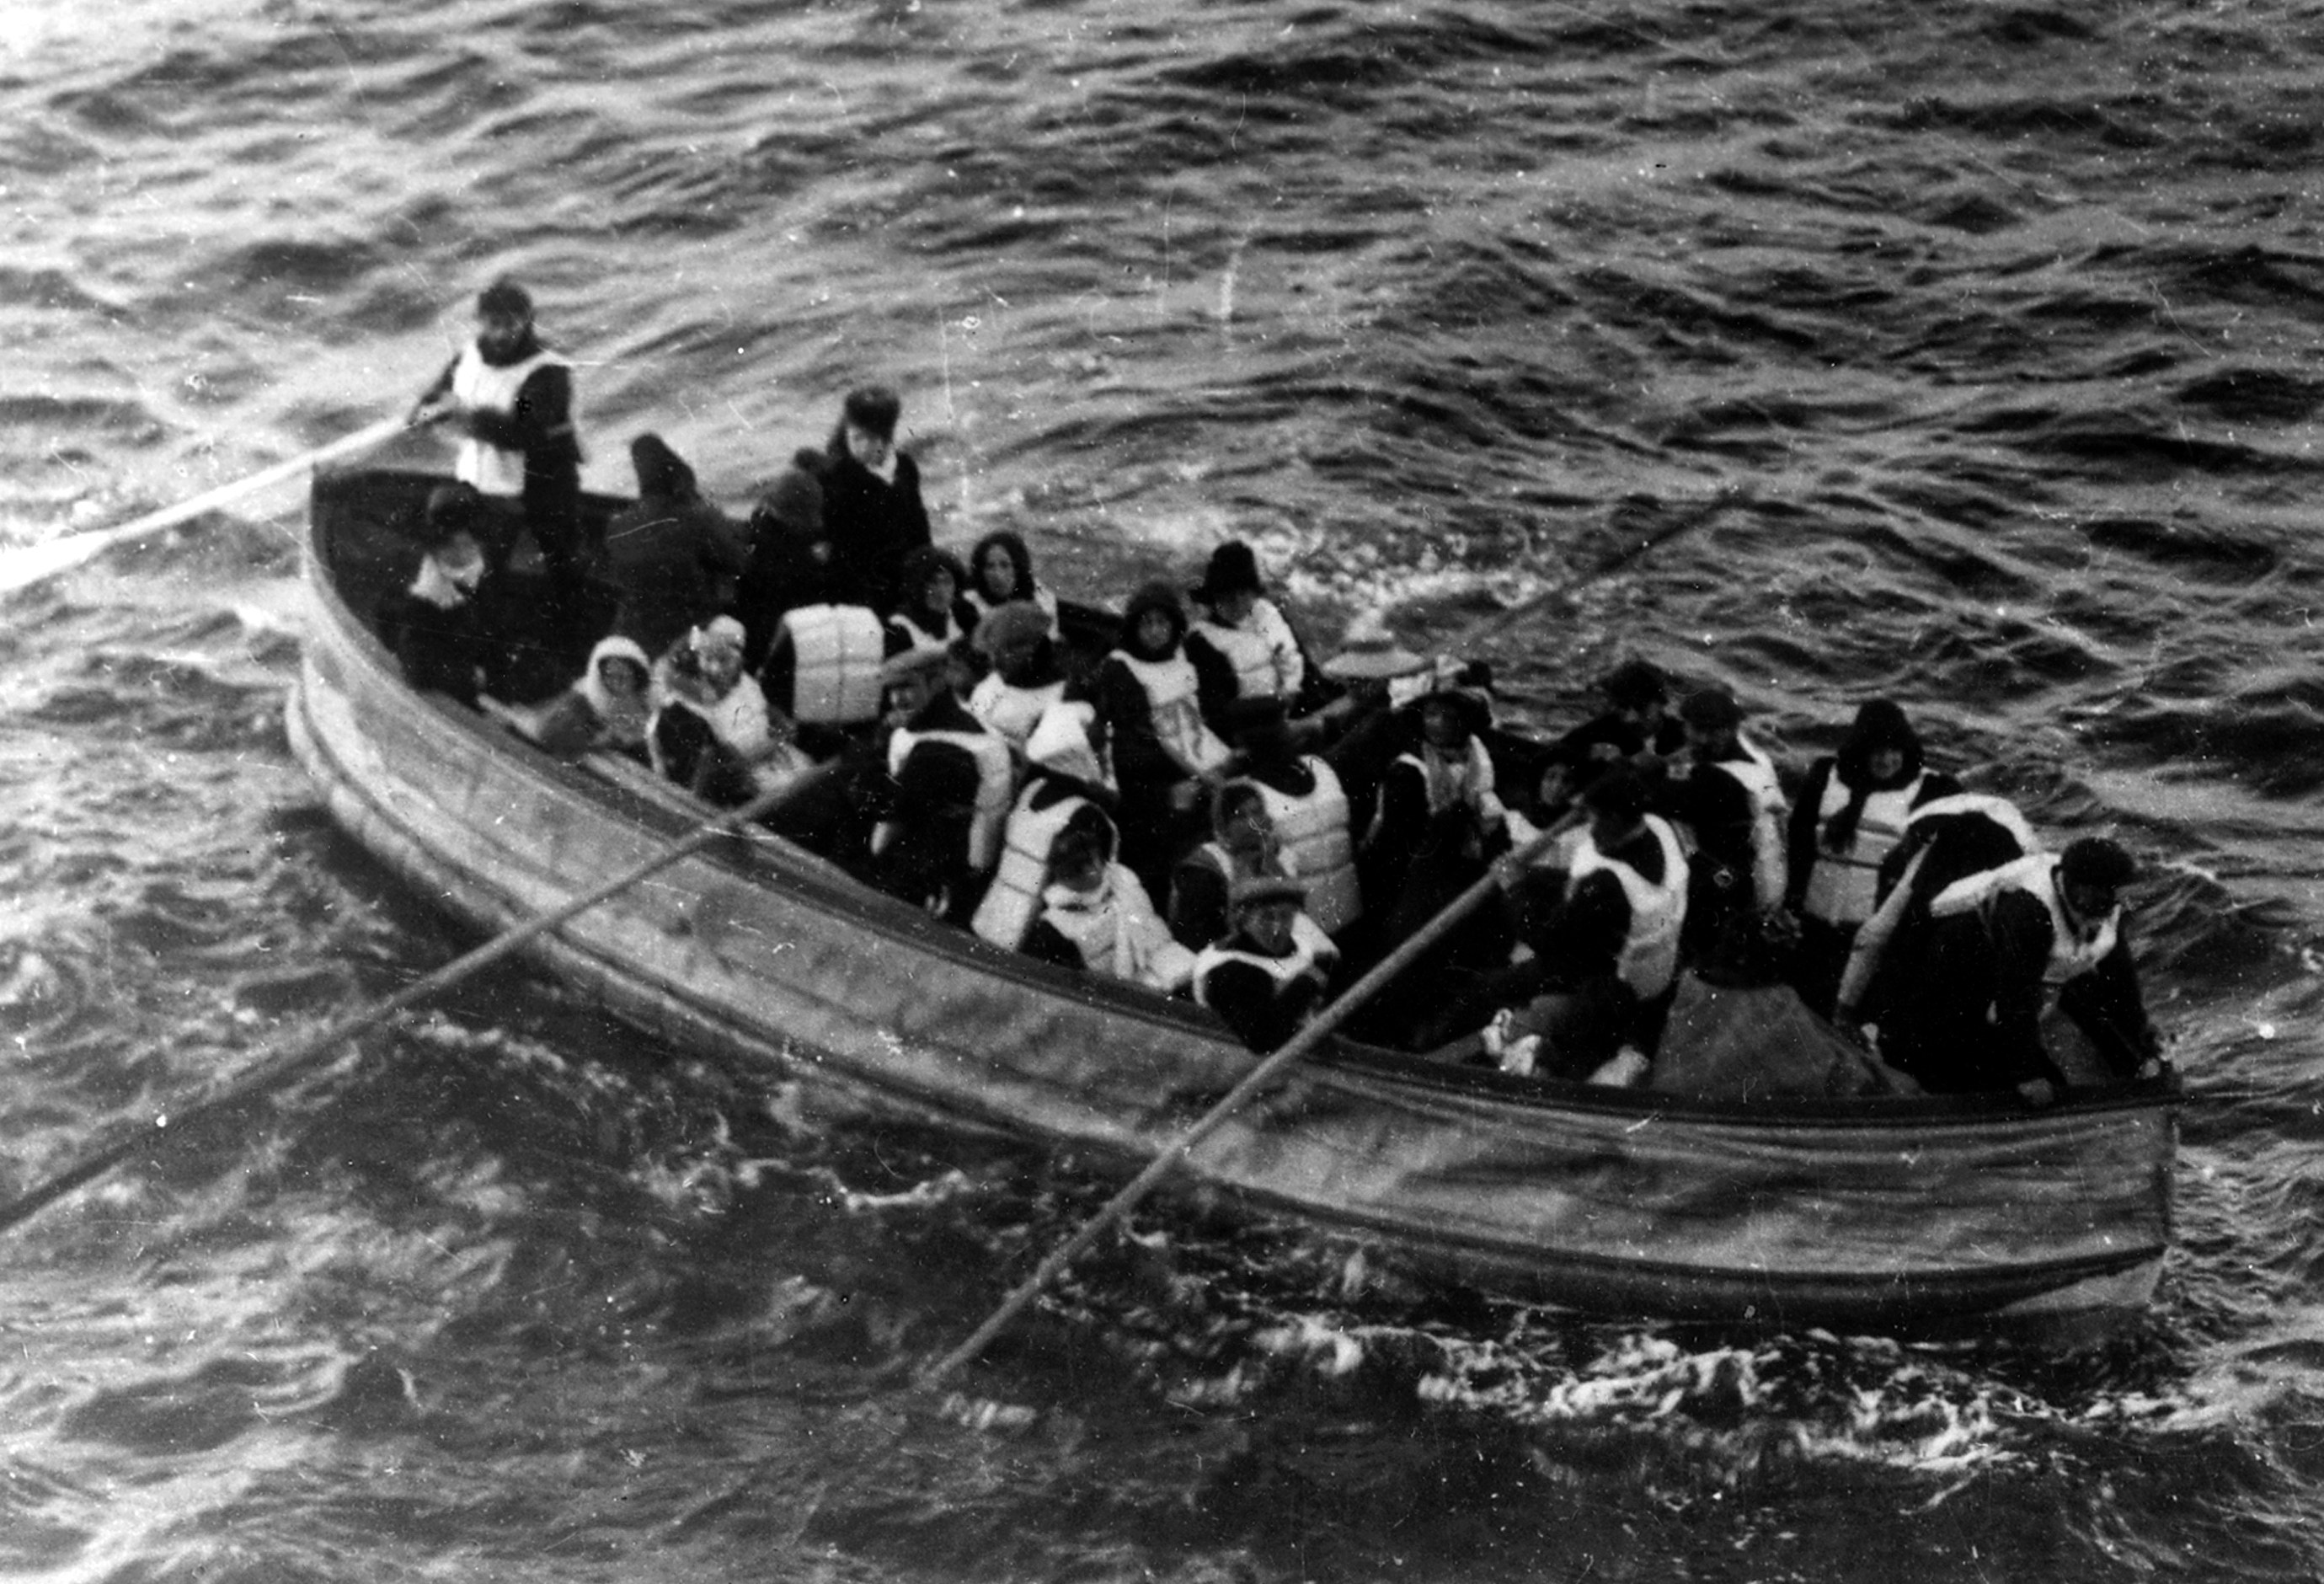  Titanic passengers in Collapsible Boat D, then partially flooded with ice-cold water, approach RMS Carpathia at 7:15 a.m. on April 15, 1912. 